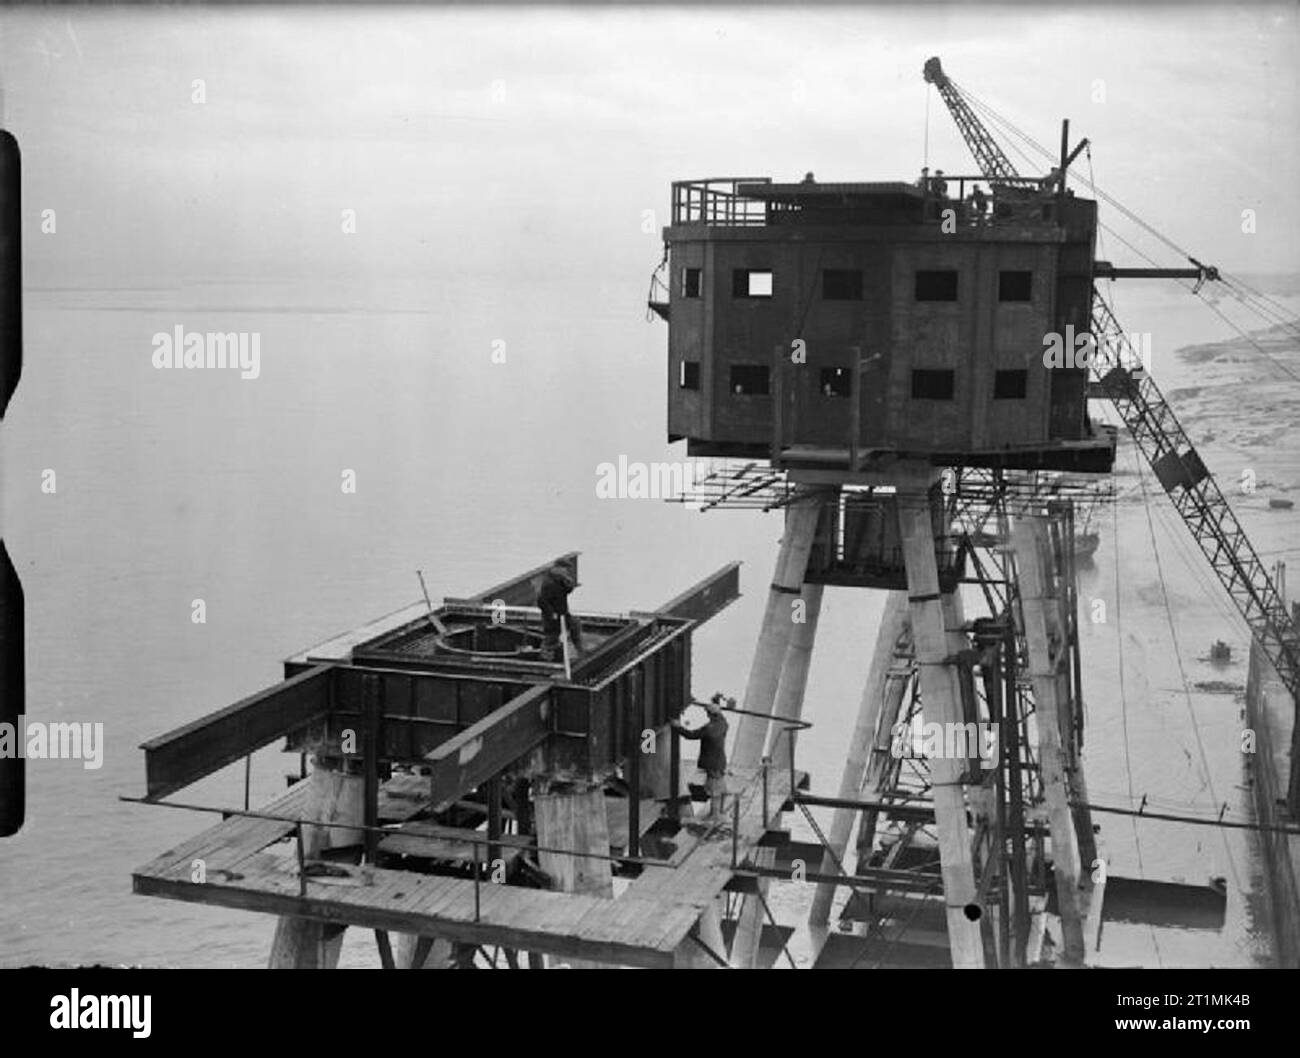 The Royal Navy during the Second World War 120 foot Maunsell anti-aircraft forts for use in the Mersey Estuary under construction at Bromborough Dock. Here the partially completed accommodation block has been fitted to the four long legs that will rest on the sea bed. Stock Photo